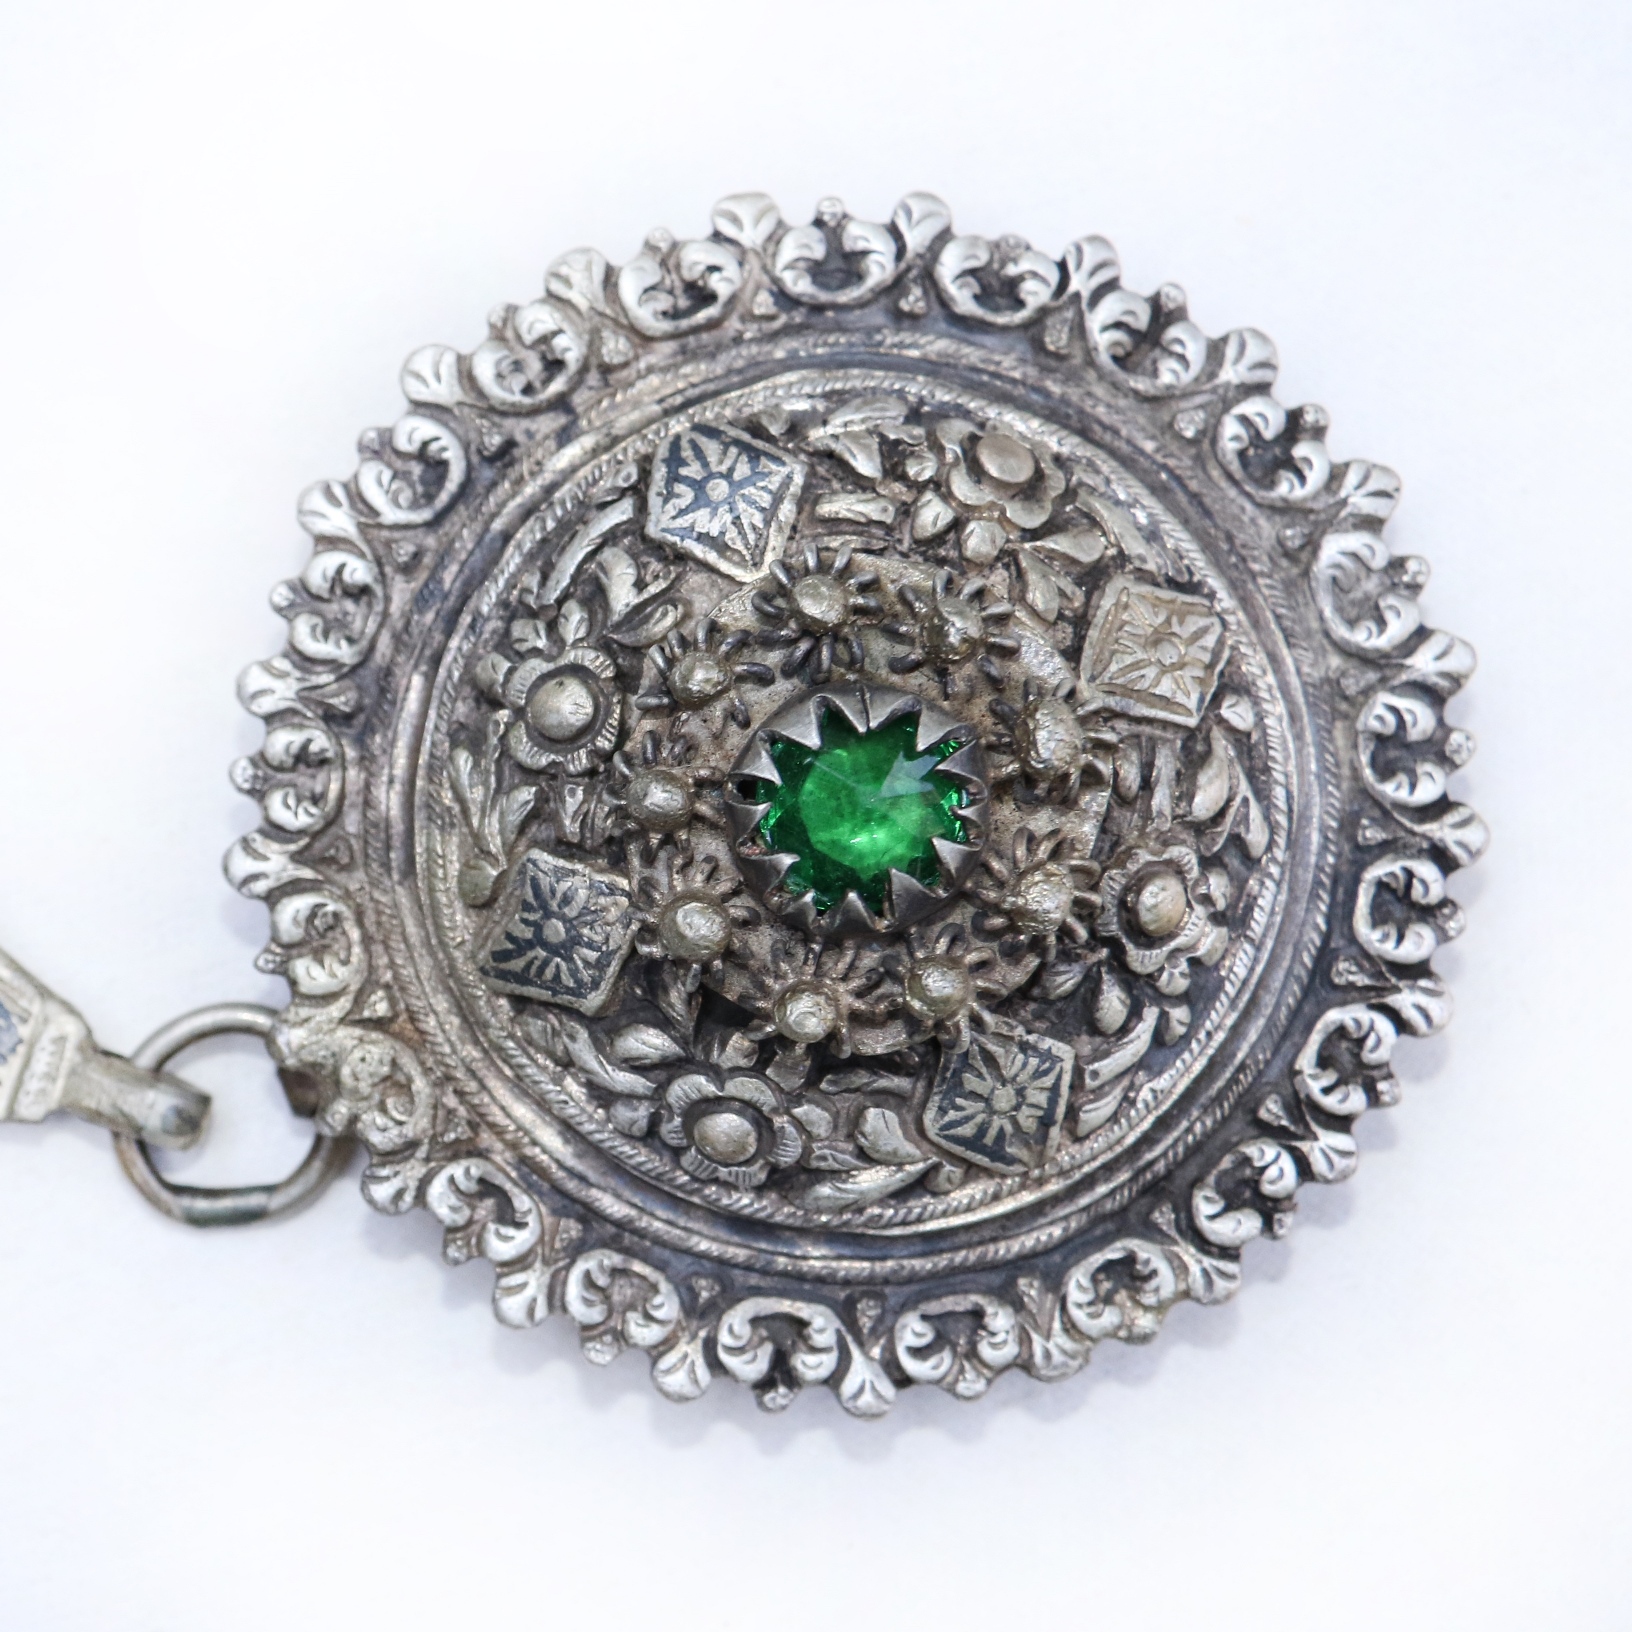 Ornate brooch with built-in green stone.